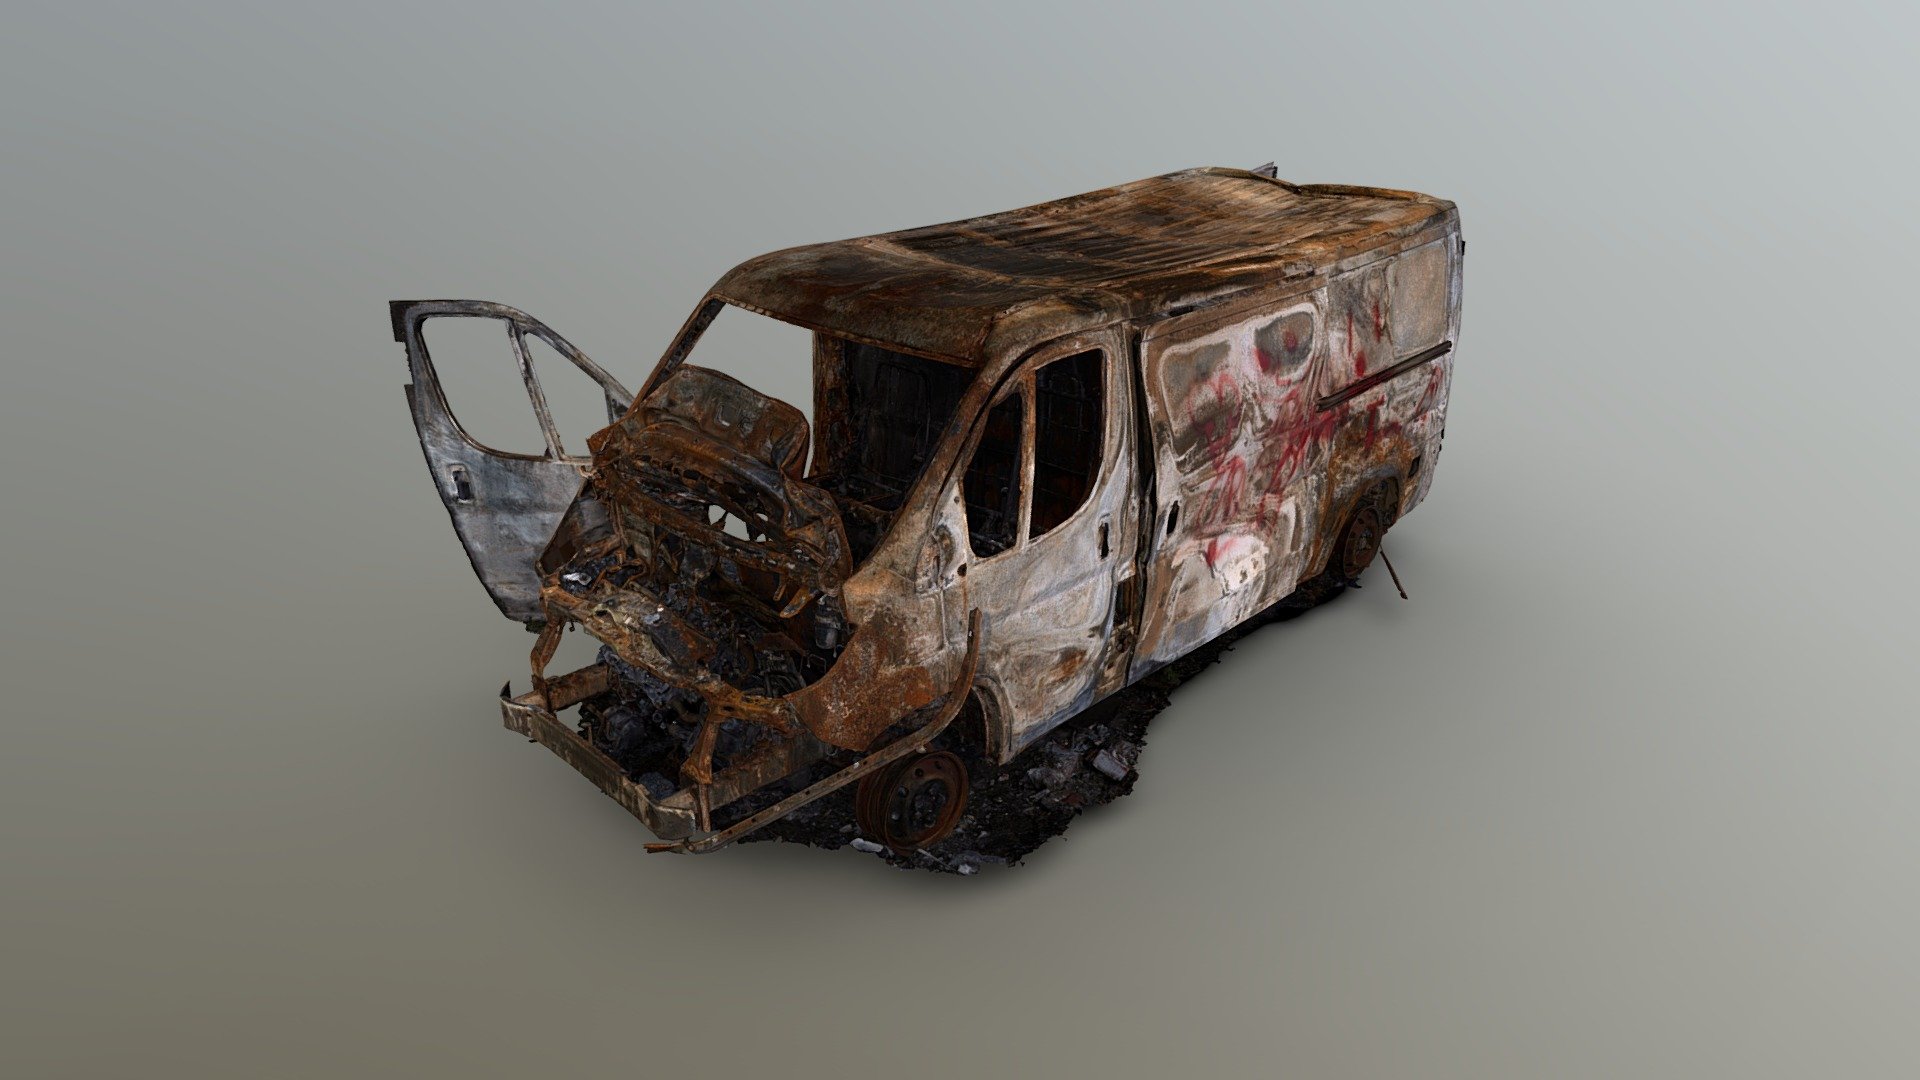 My friend Erik Christensen and I had an evening to kill so we ended up around the coast with our Photogrammetry gear scanning this awesome van that had been burnt. 
Huge credit goes to Erik  for driving us out to the site and processing the high resolution data we captured.

This scan was created with 2474 images (culled down from 3000+). The shoot was approached in two passes, with Erik taking on the polarised side of the shoot while I did the specular shoot.

Shot with 50mm lenses and Godox AR400 strobes at night time. Canon + Nikon fullframe 3d model